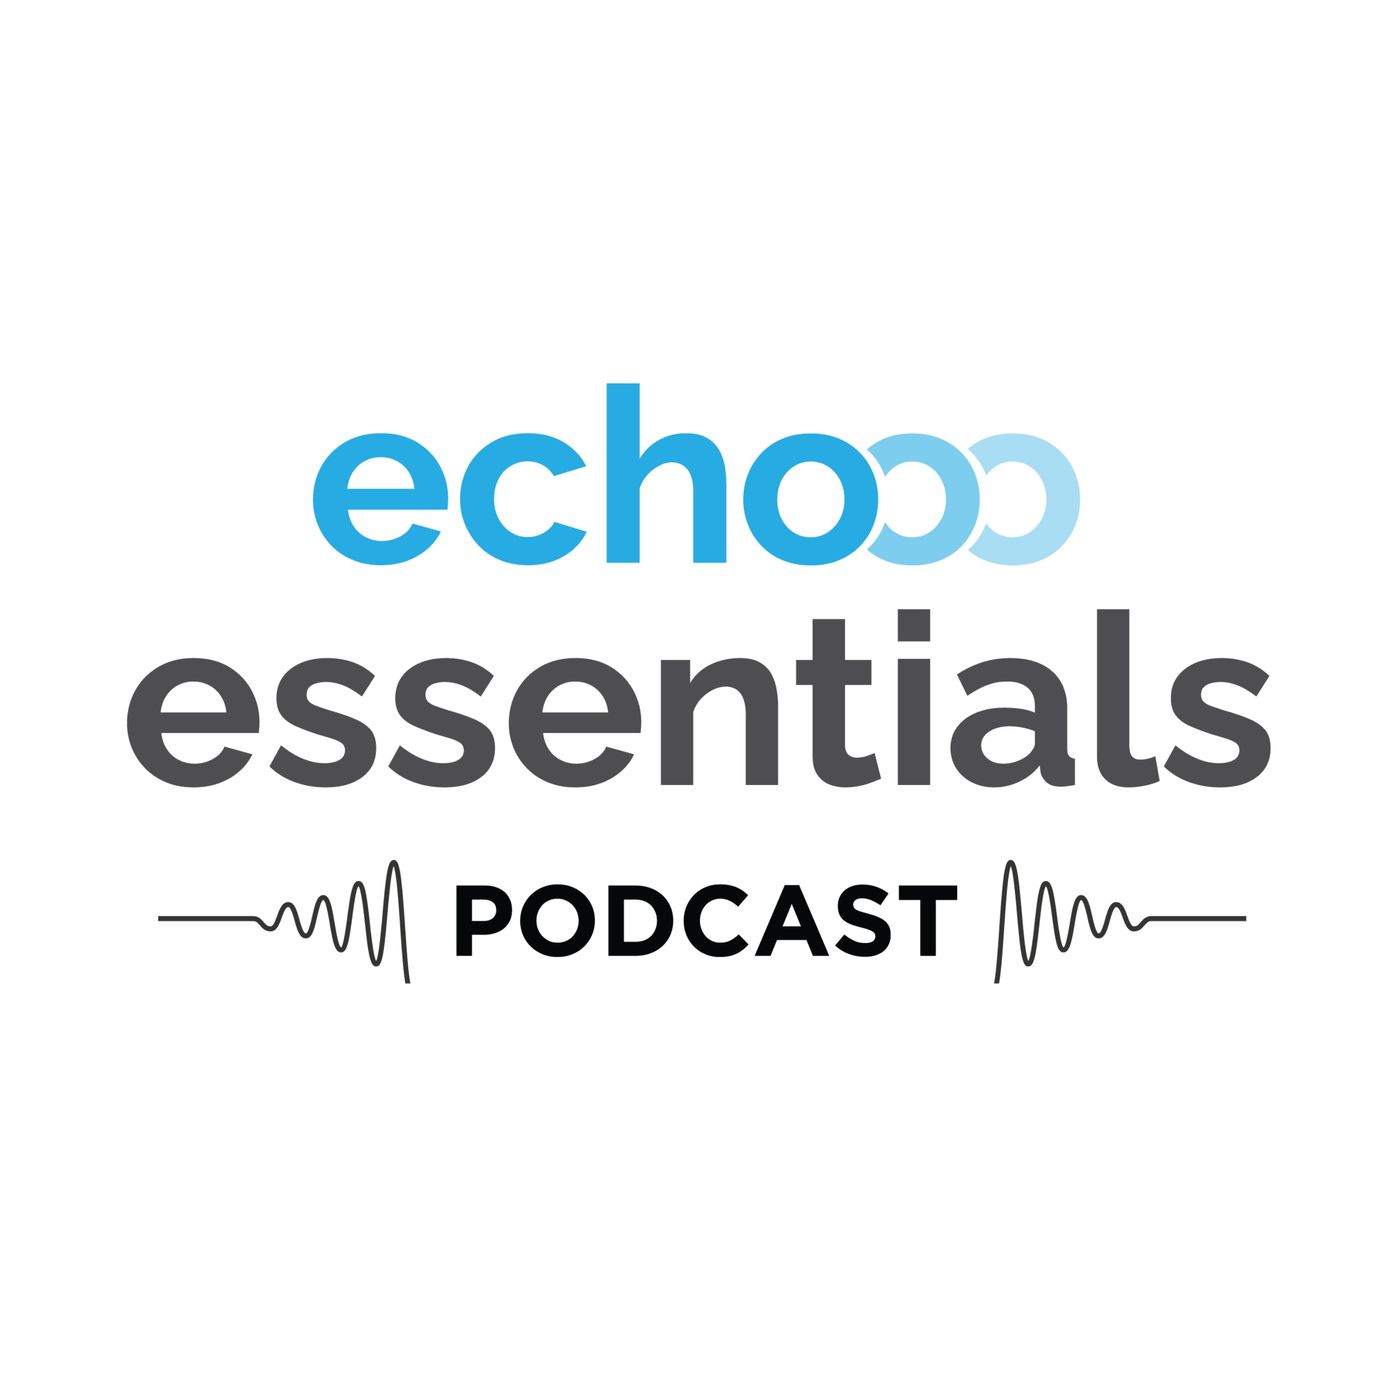 Is Immigration a Problem in North Bay? - Echo Essentials Podcast